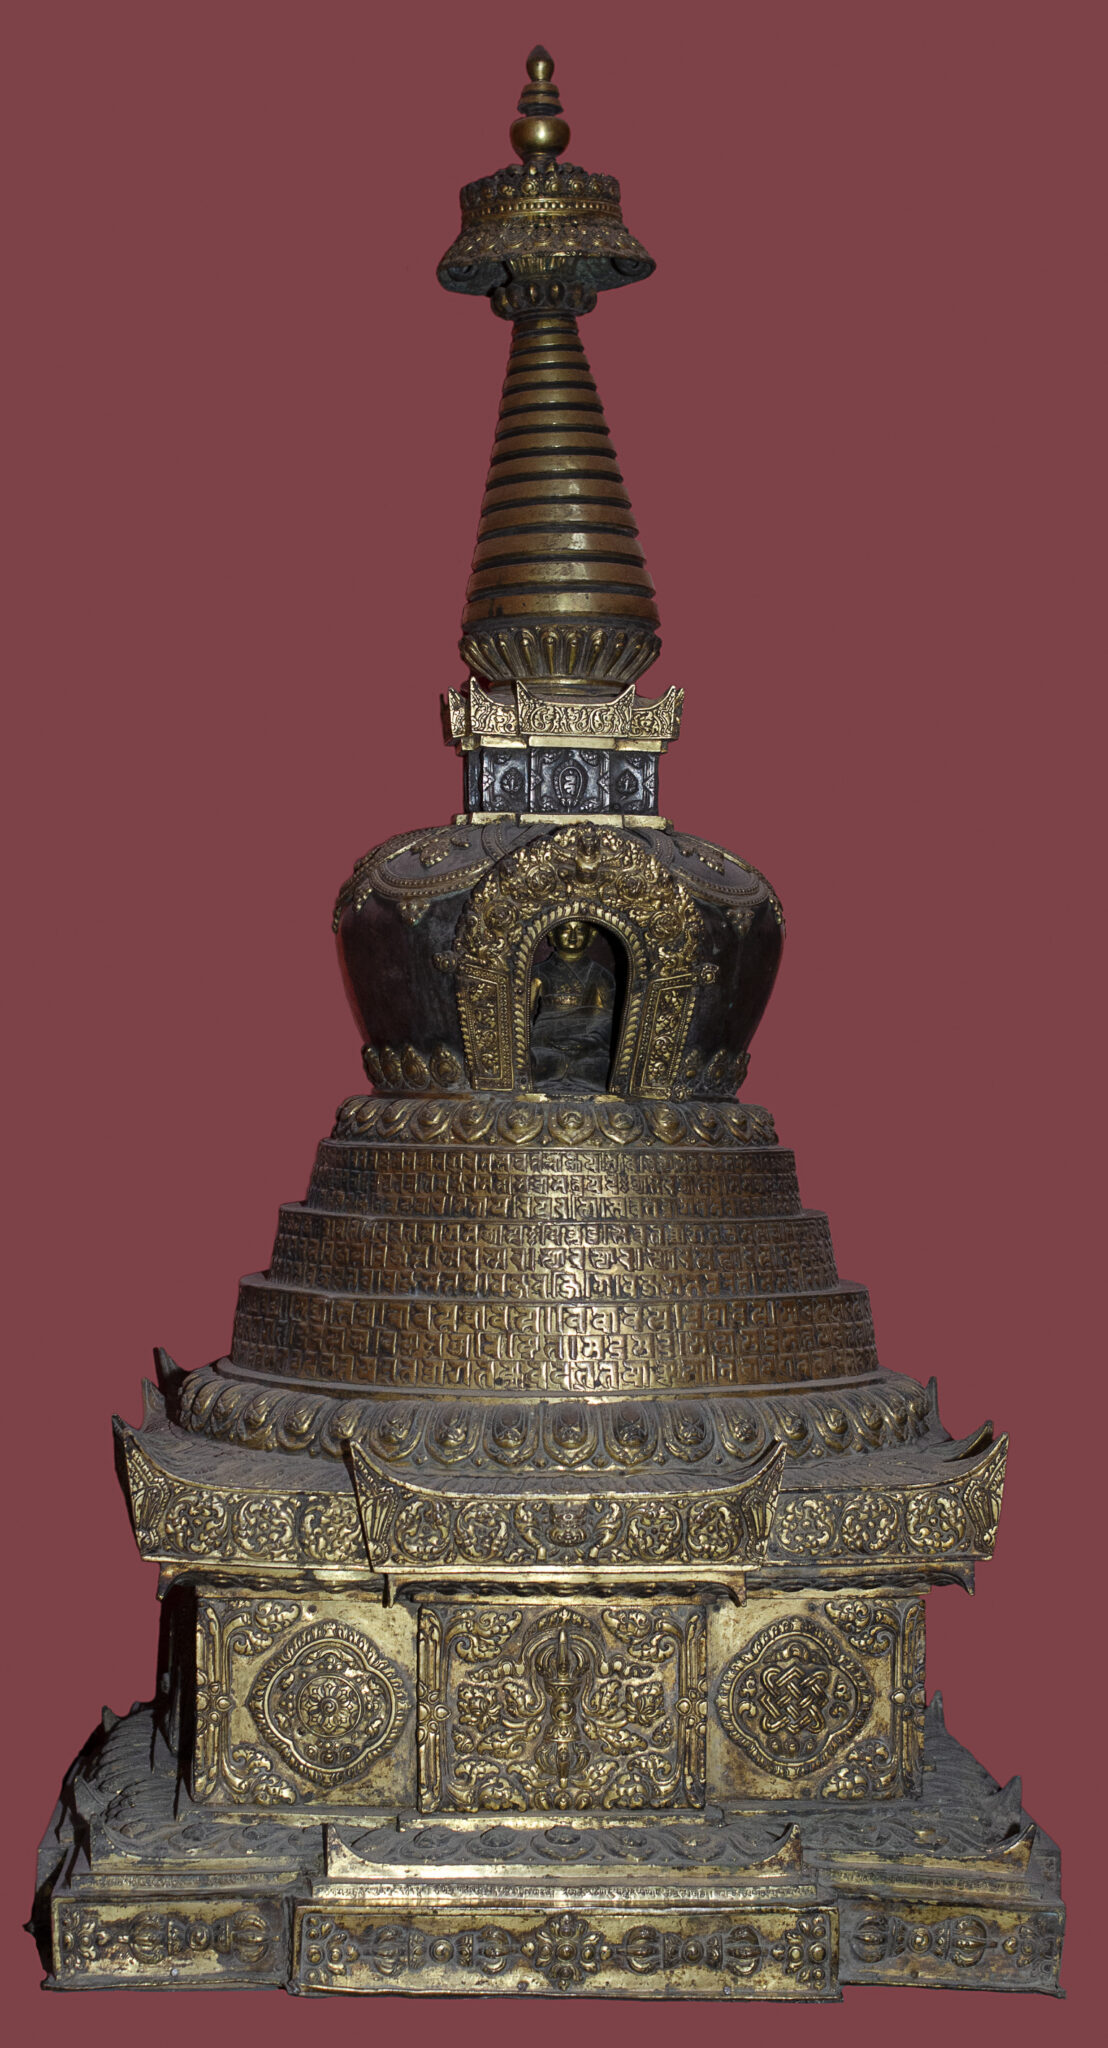 Metal devotional implement in stupa shape featuring deity image at center, filigree work, and script